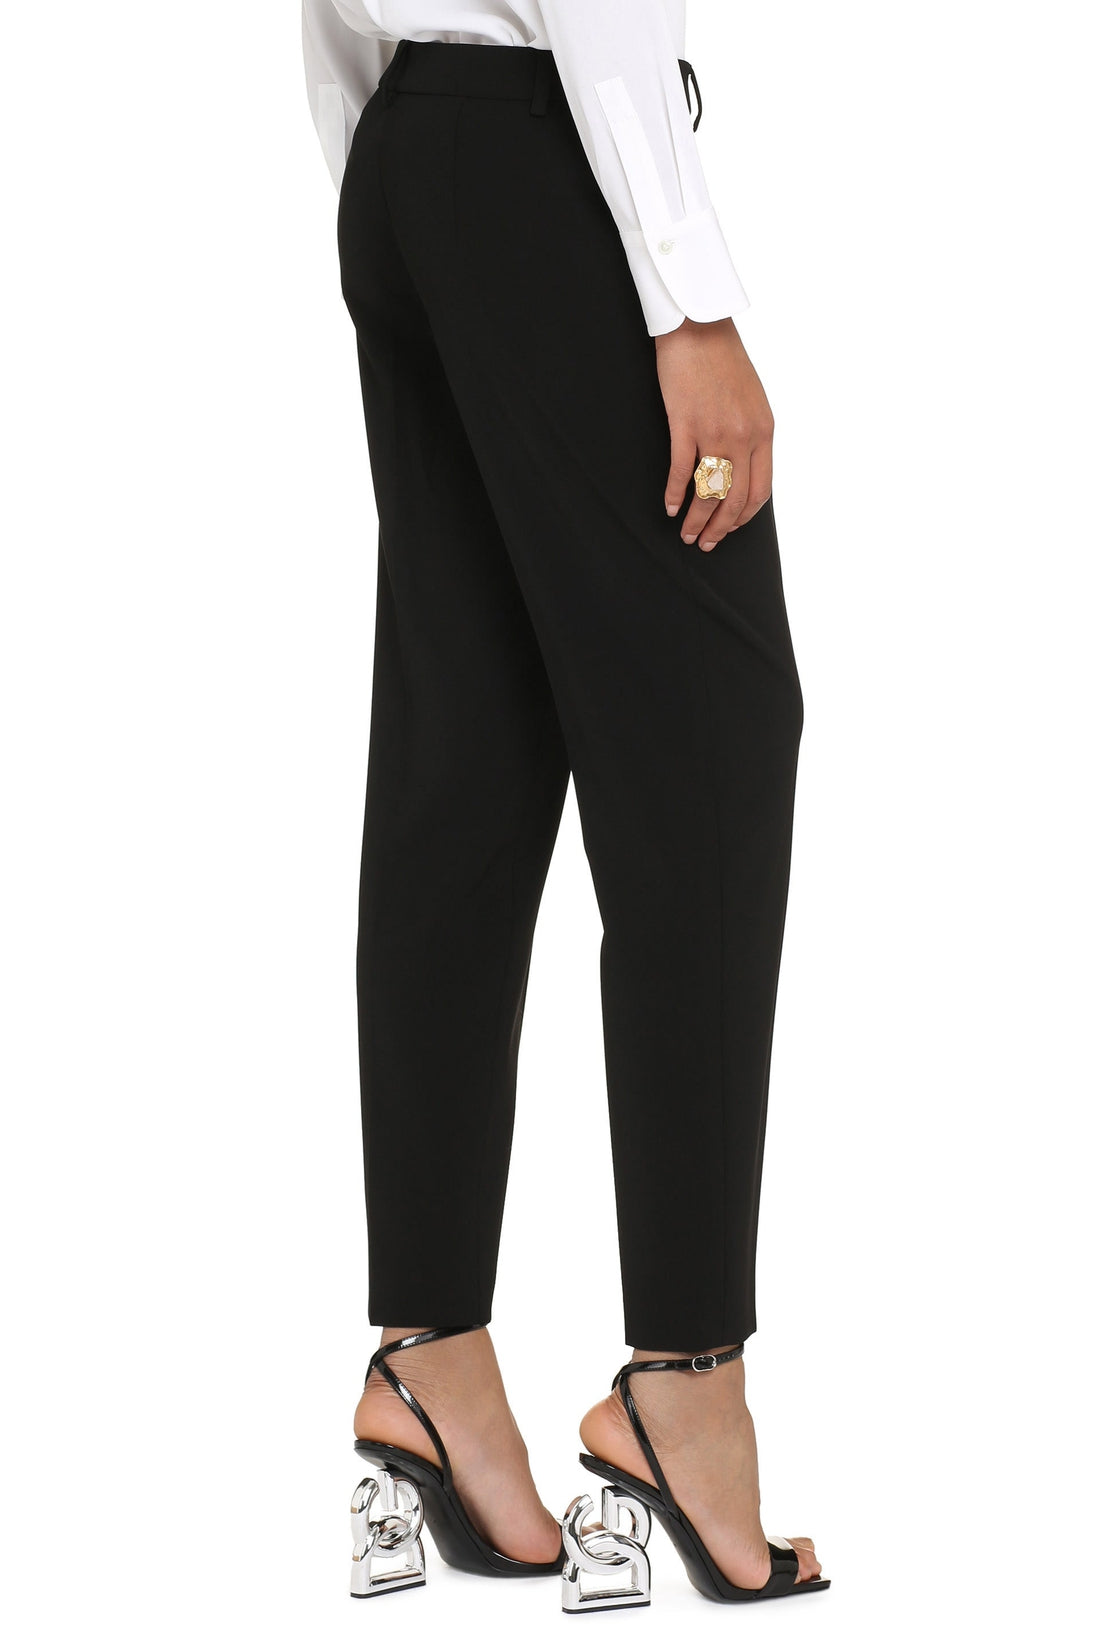 Boutique Moschino-OUTLET-SALE-Crepe pants with straight legs-ARCHIVIST